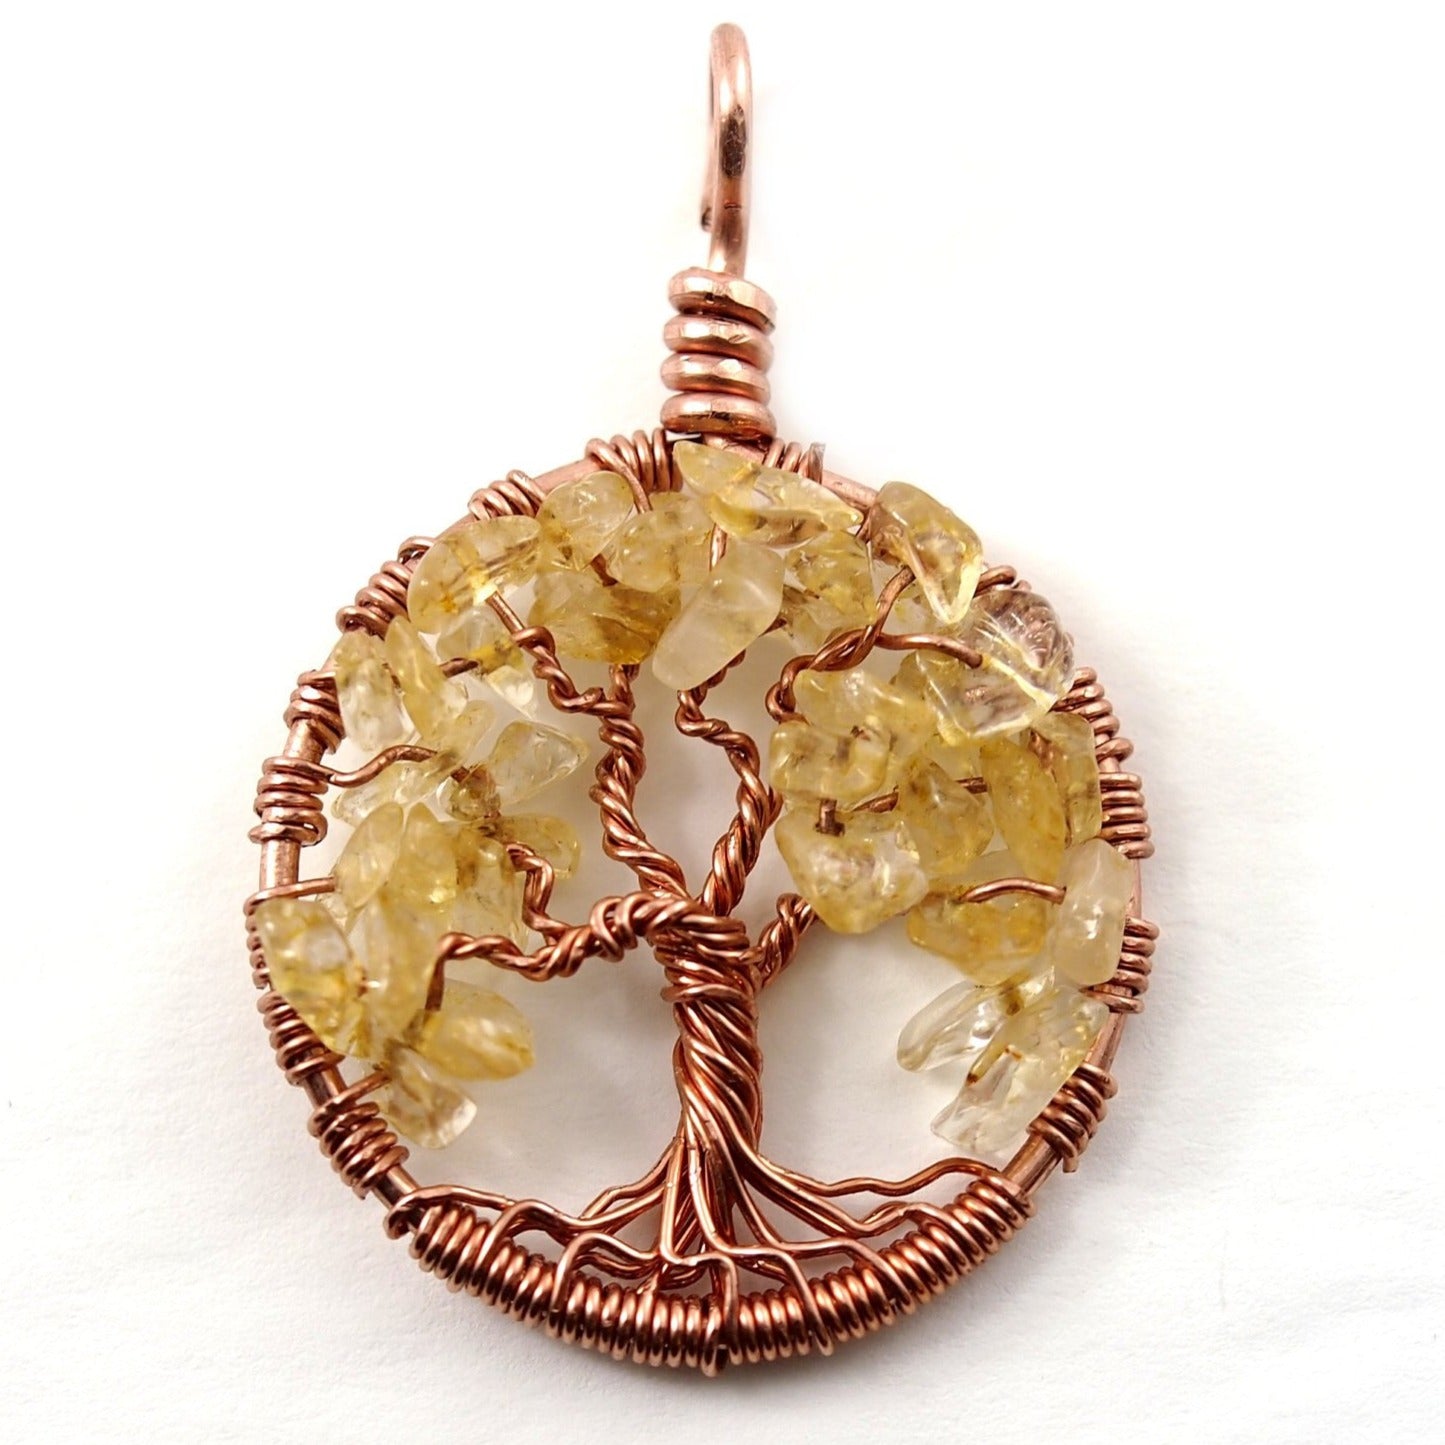 A close up image of the November birthstone tree of life pendant from Uncorked & Bottled Up made with genuine citrine gemstones and copper wire